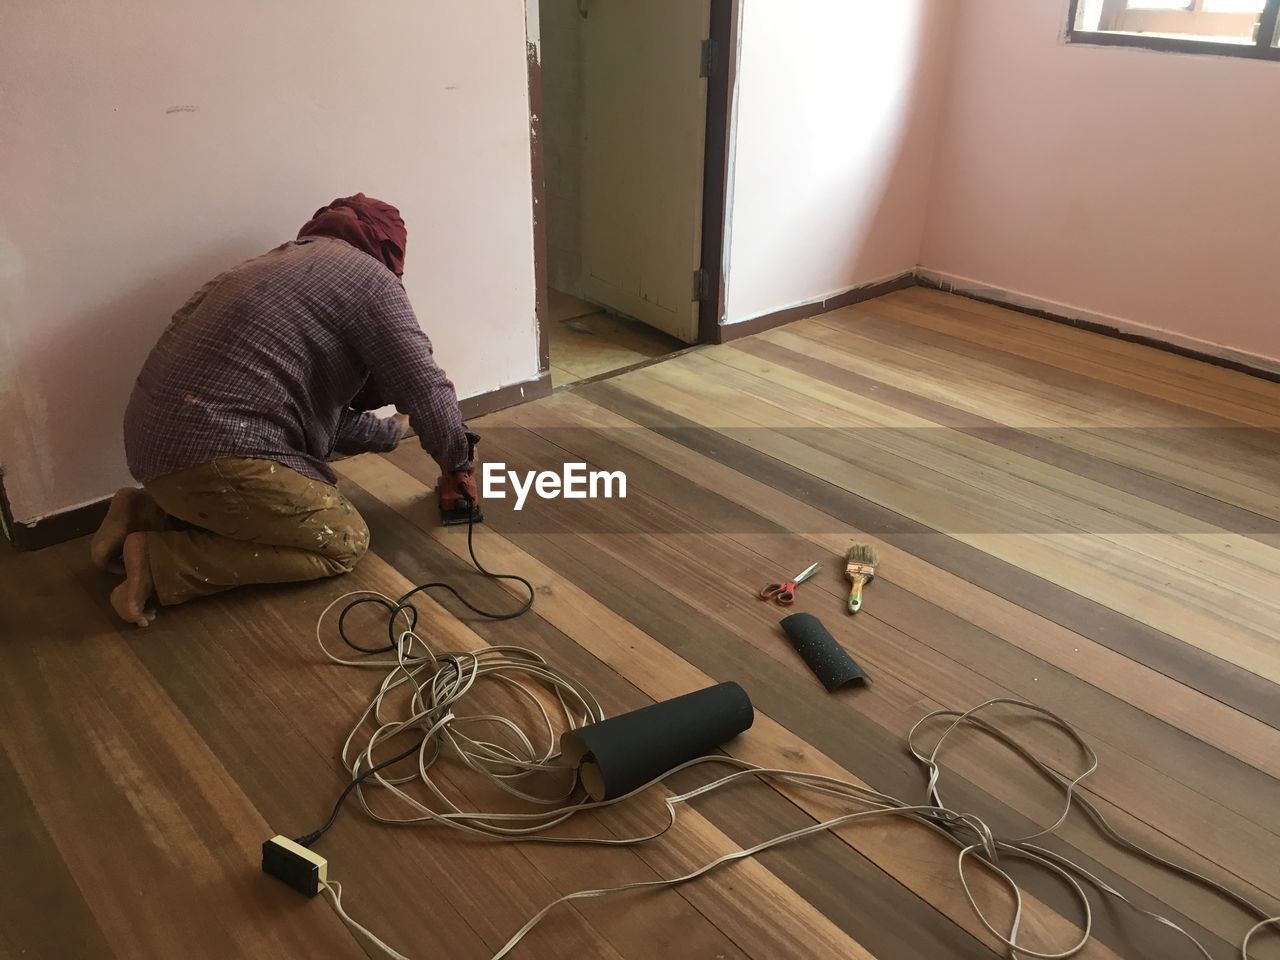 Worker working on wooden floor at home